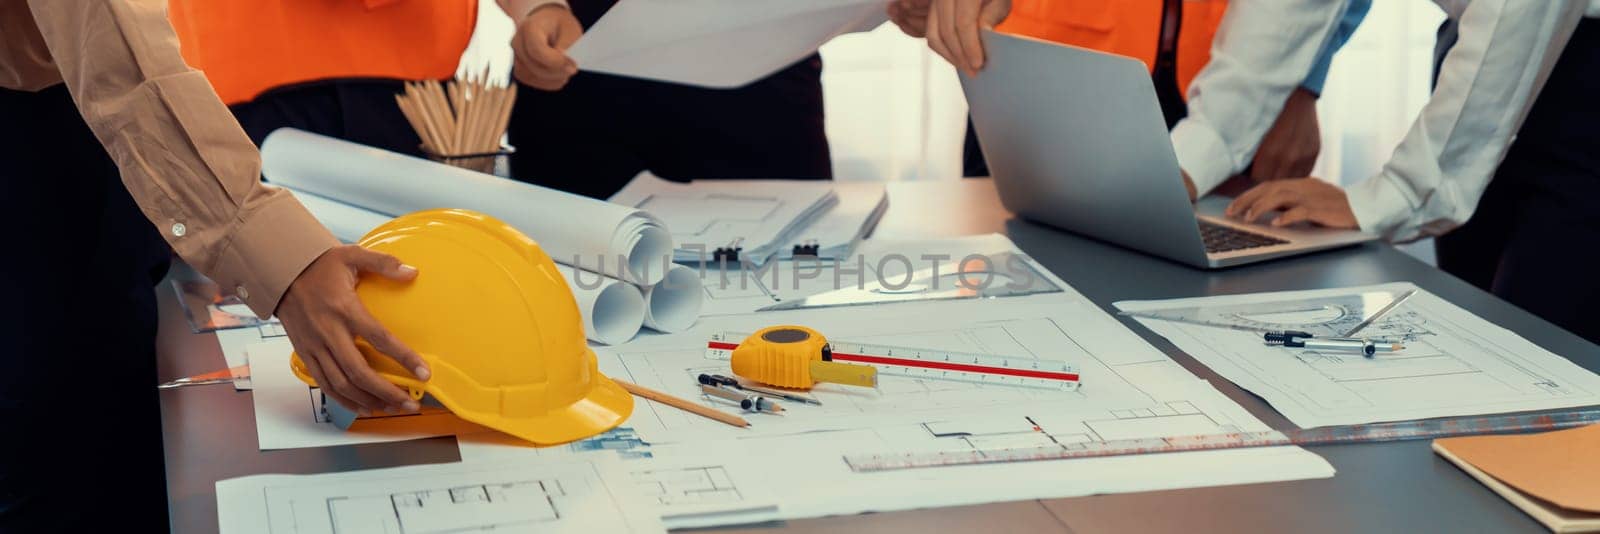 Engineer partner drawing and working on blueprint design together on office table for architectural building construction project. Architect drafting interior blueprint layout. Insight